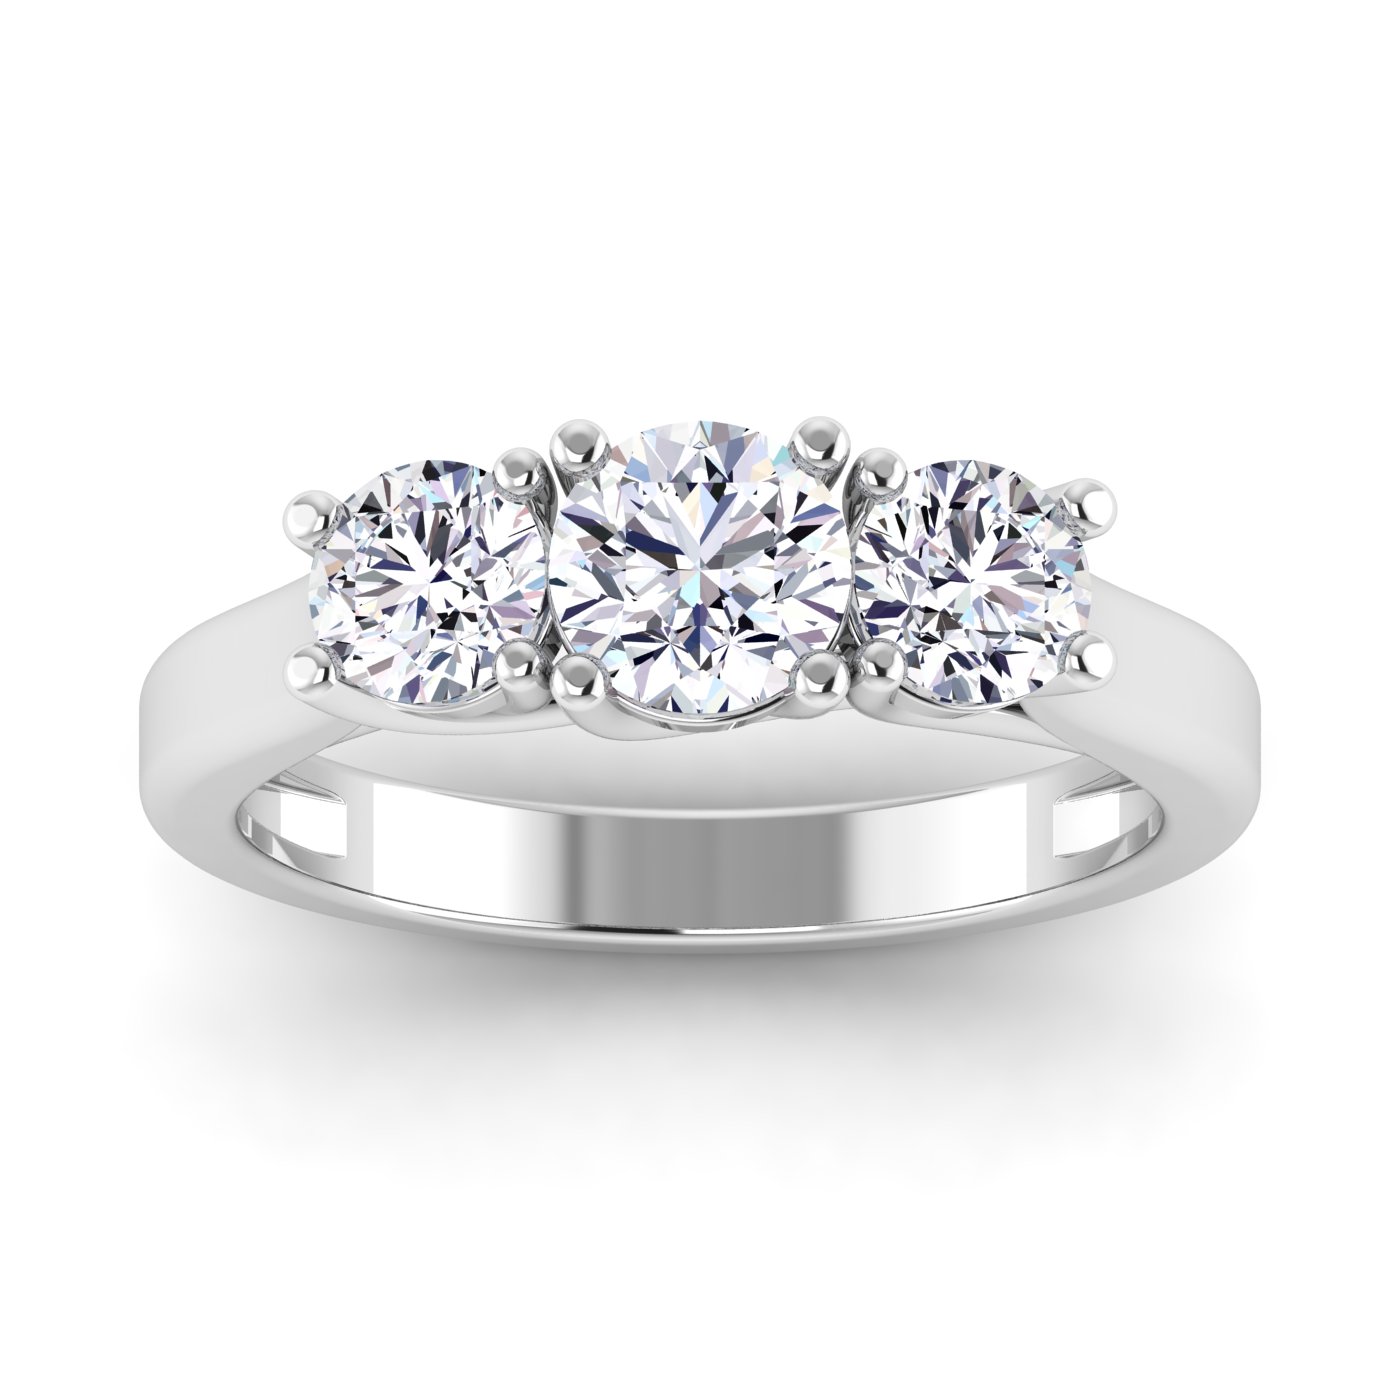 14K white gold three stone engagement ring with round lab grown diamonds and a polished band